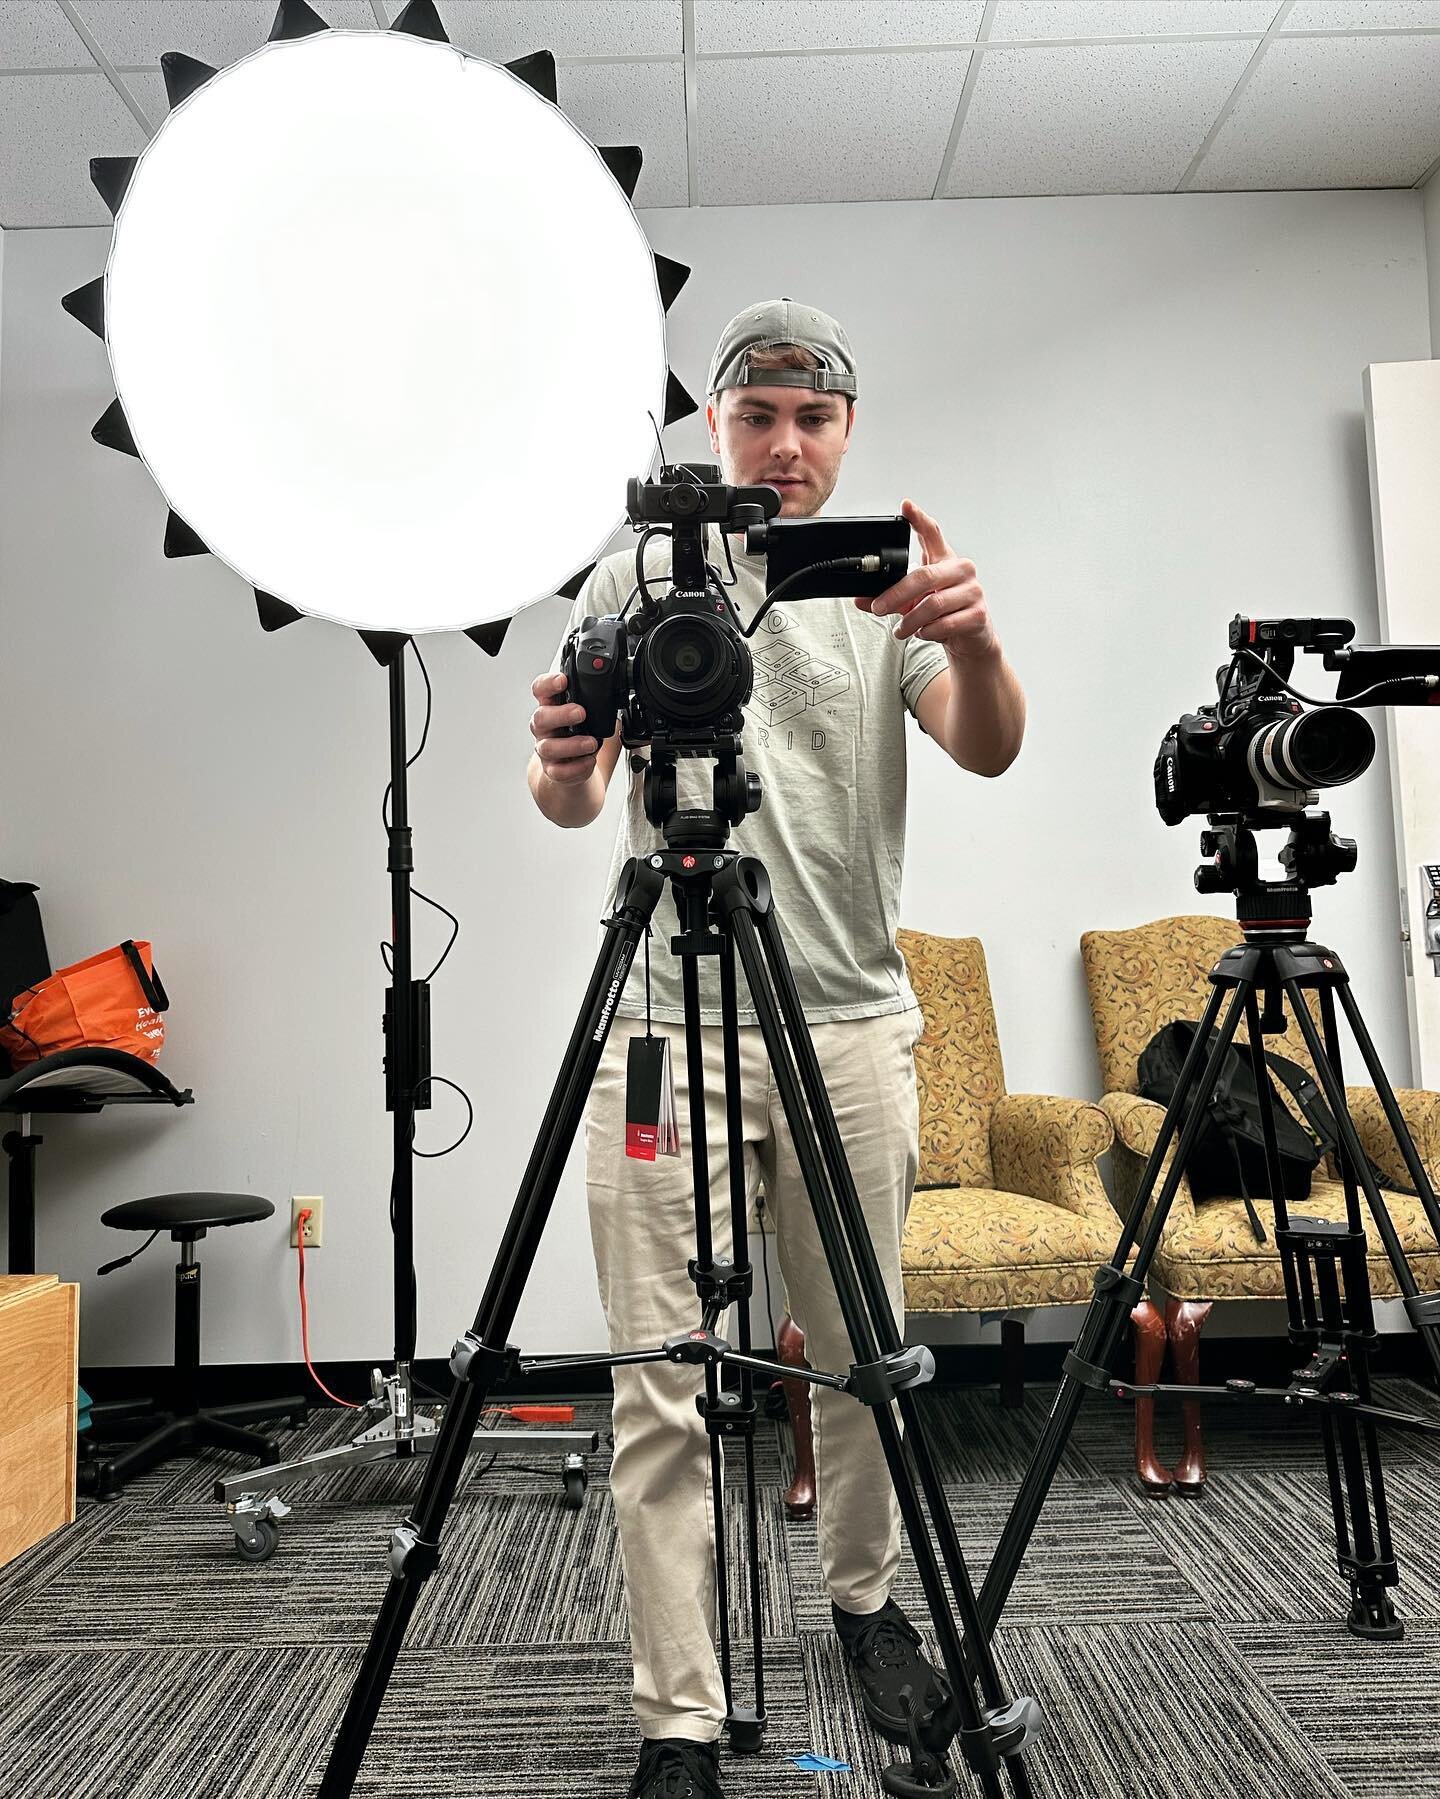 Off to a strong start in 2023, we filmed our first 2-cam interview with the NC State Board of Education Chair, Eric Davis this morning. Excited to see what the rest of the year has in store for the grid! 🎥🎬

#videoproduction#videocontent#videoediti